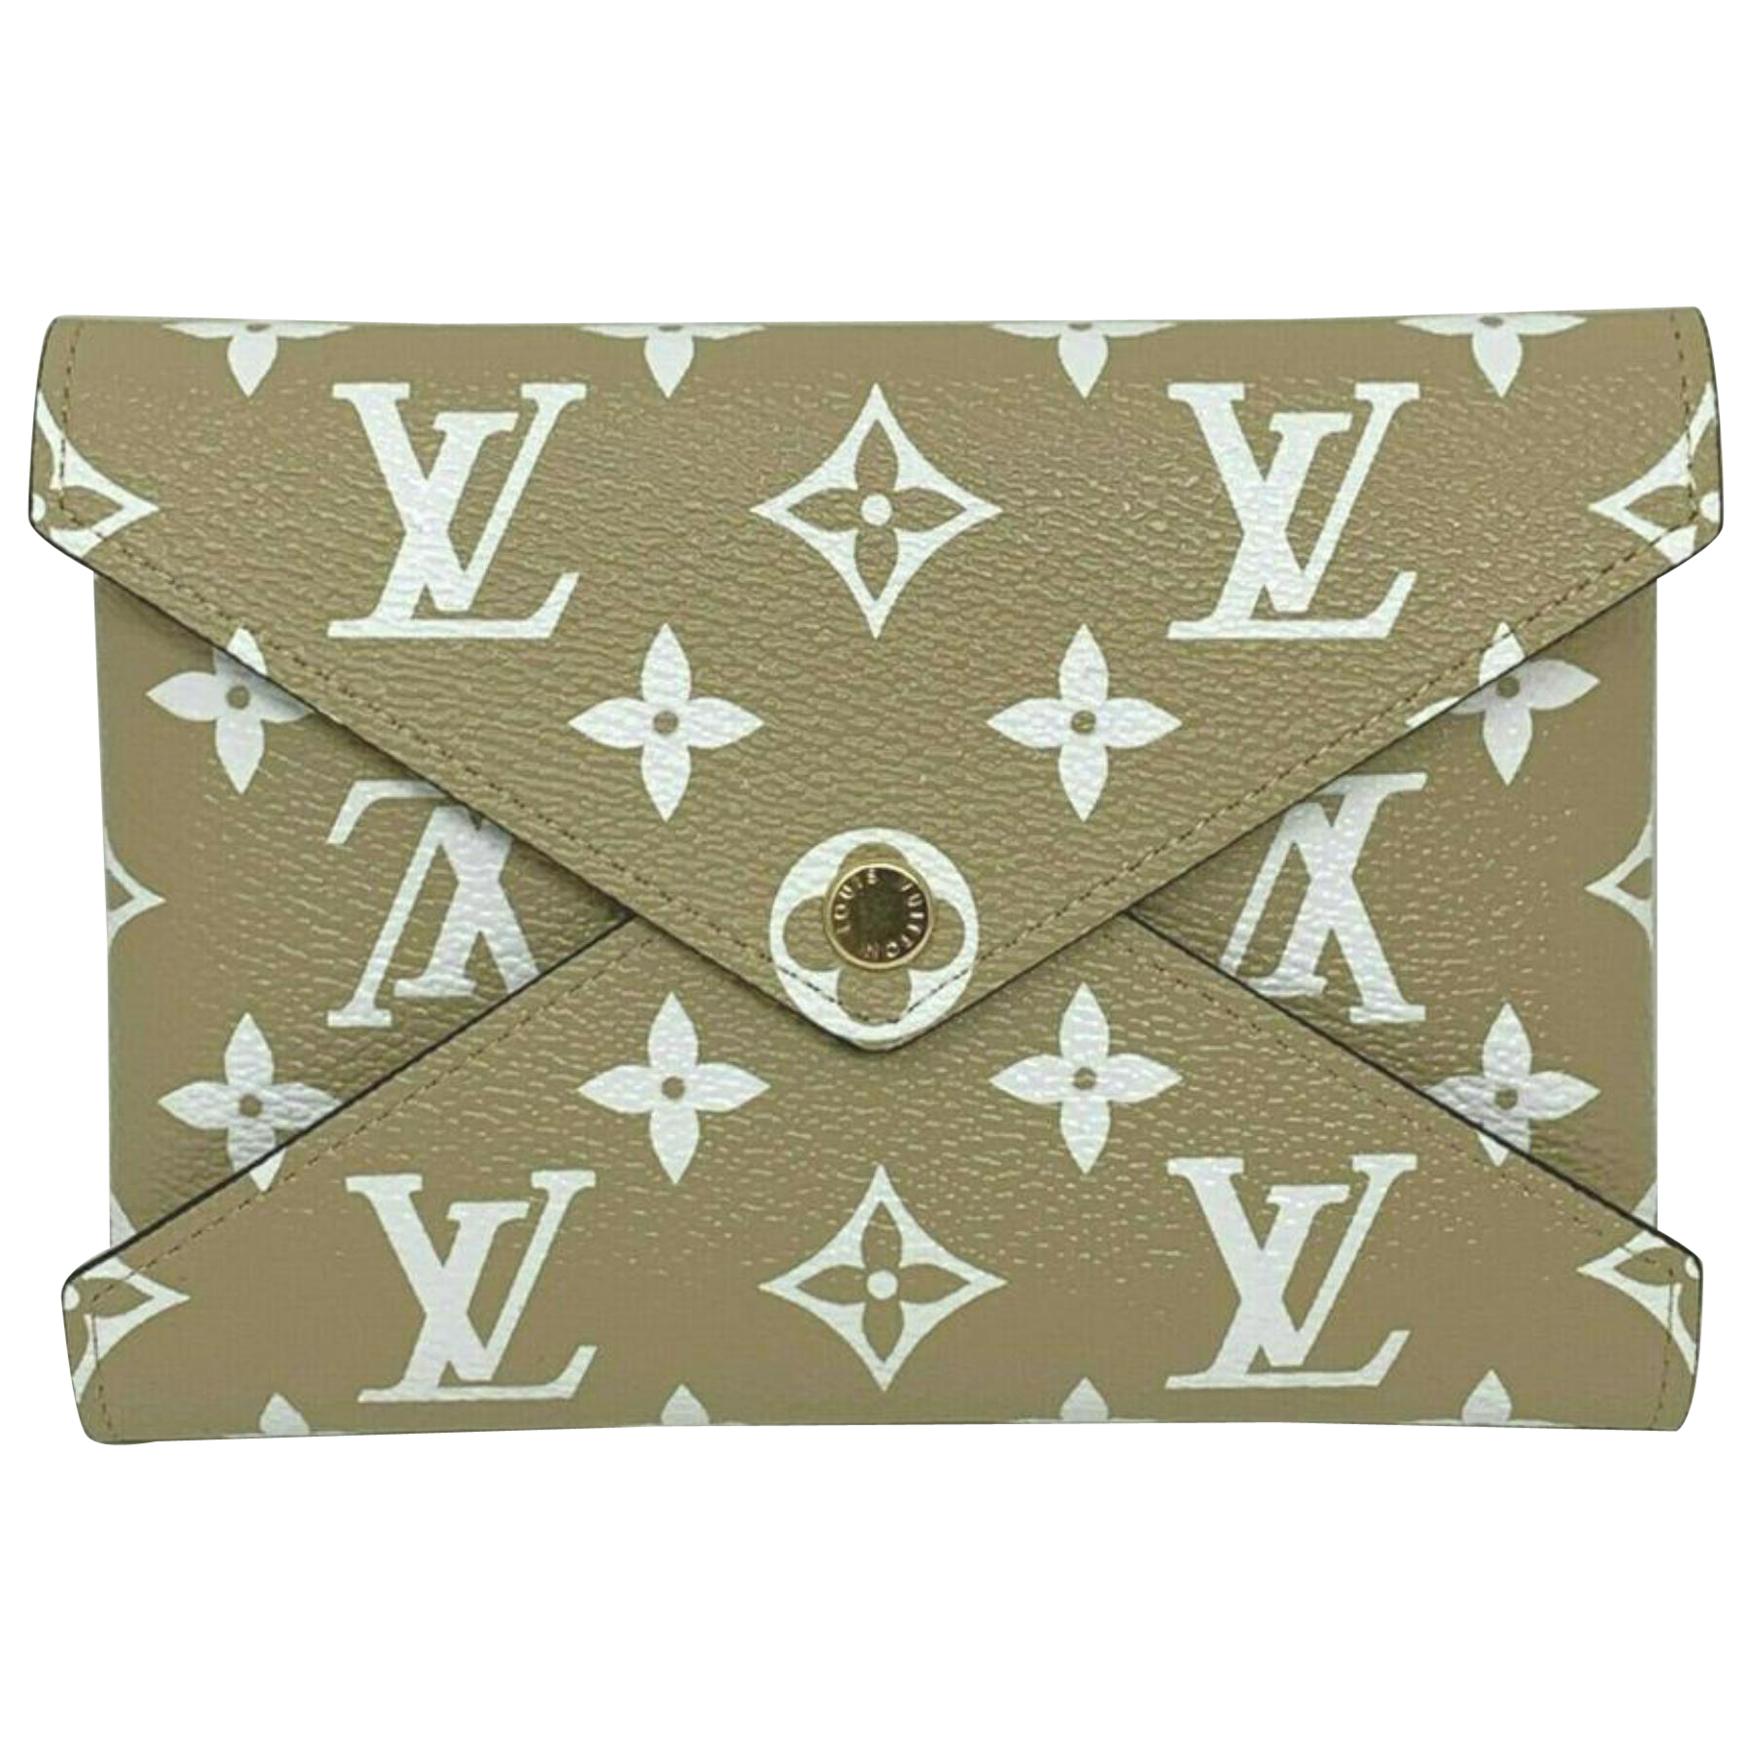 Louis Vuitton Beige Medium Ss19 Limited Edition Giant Kirigami Pouch 870619  For Sale